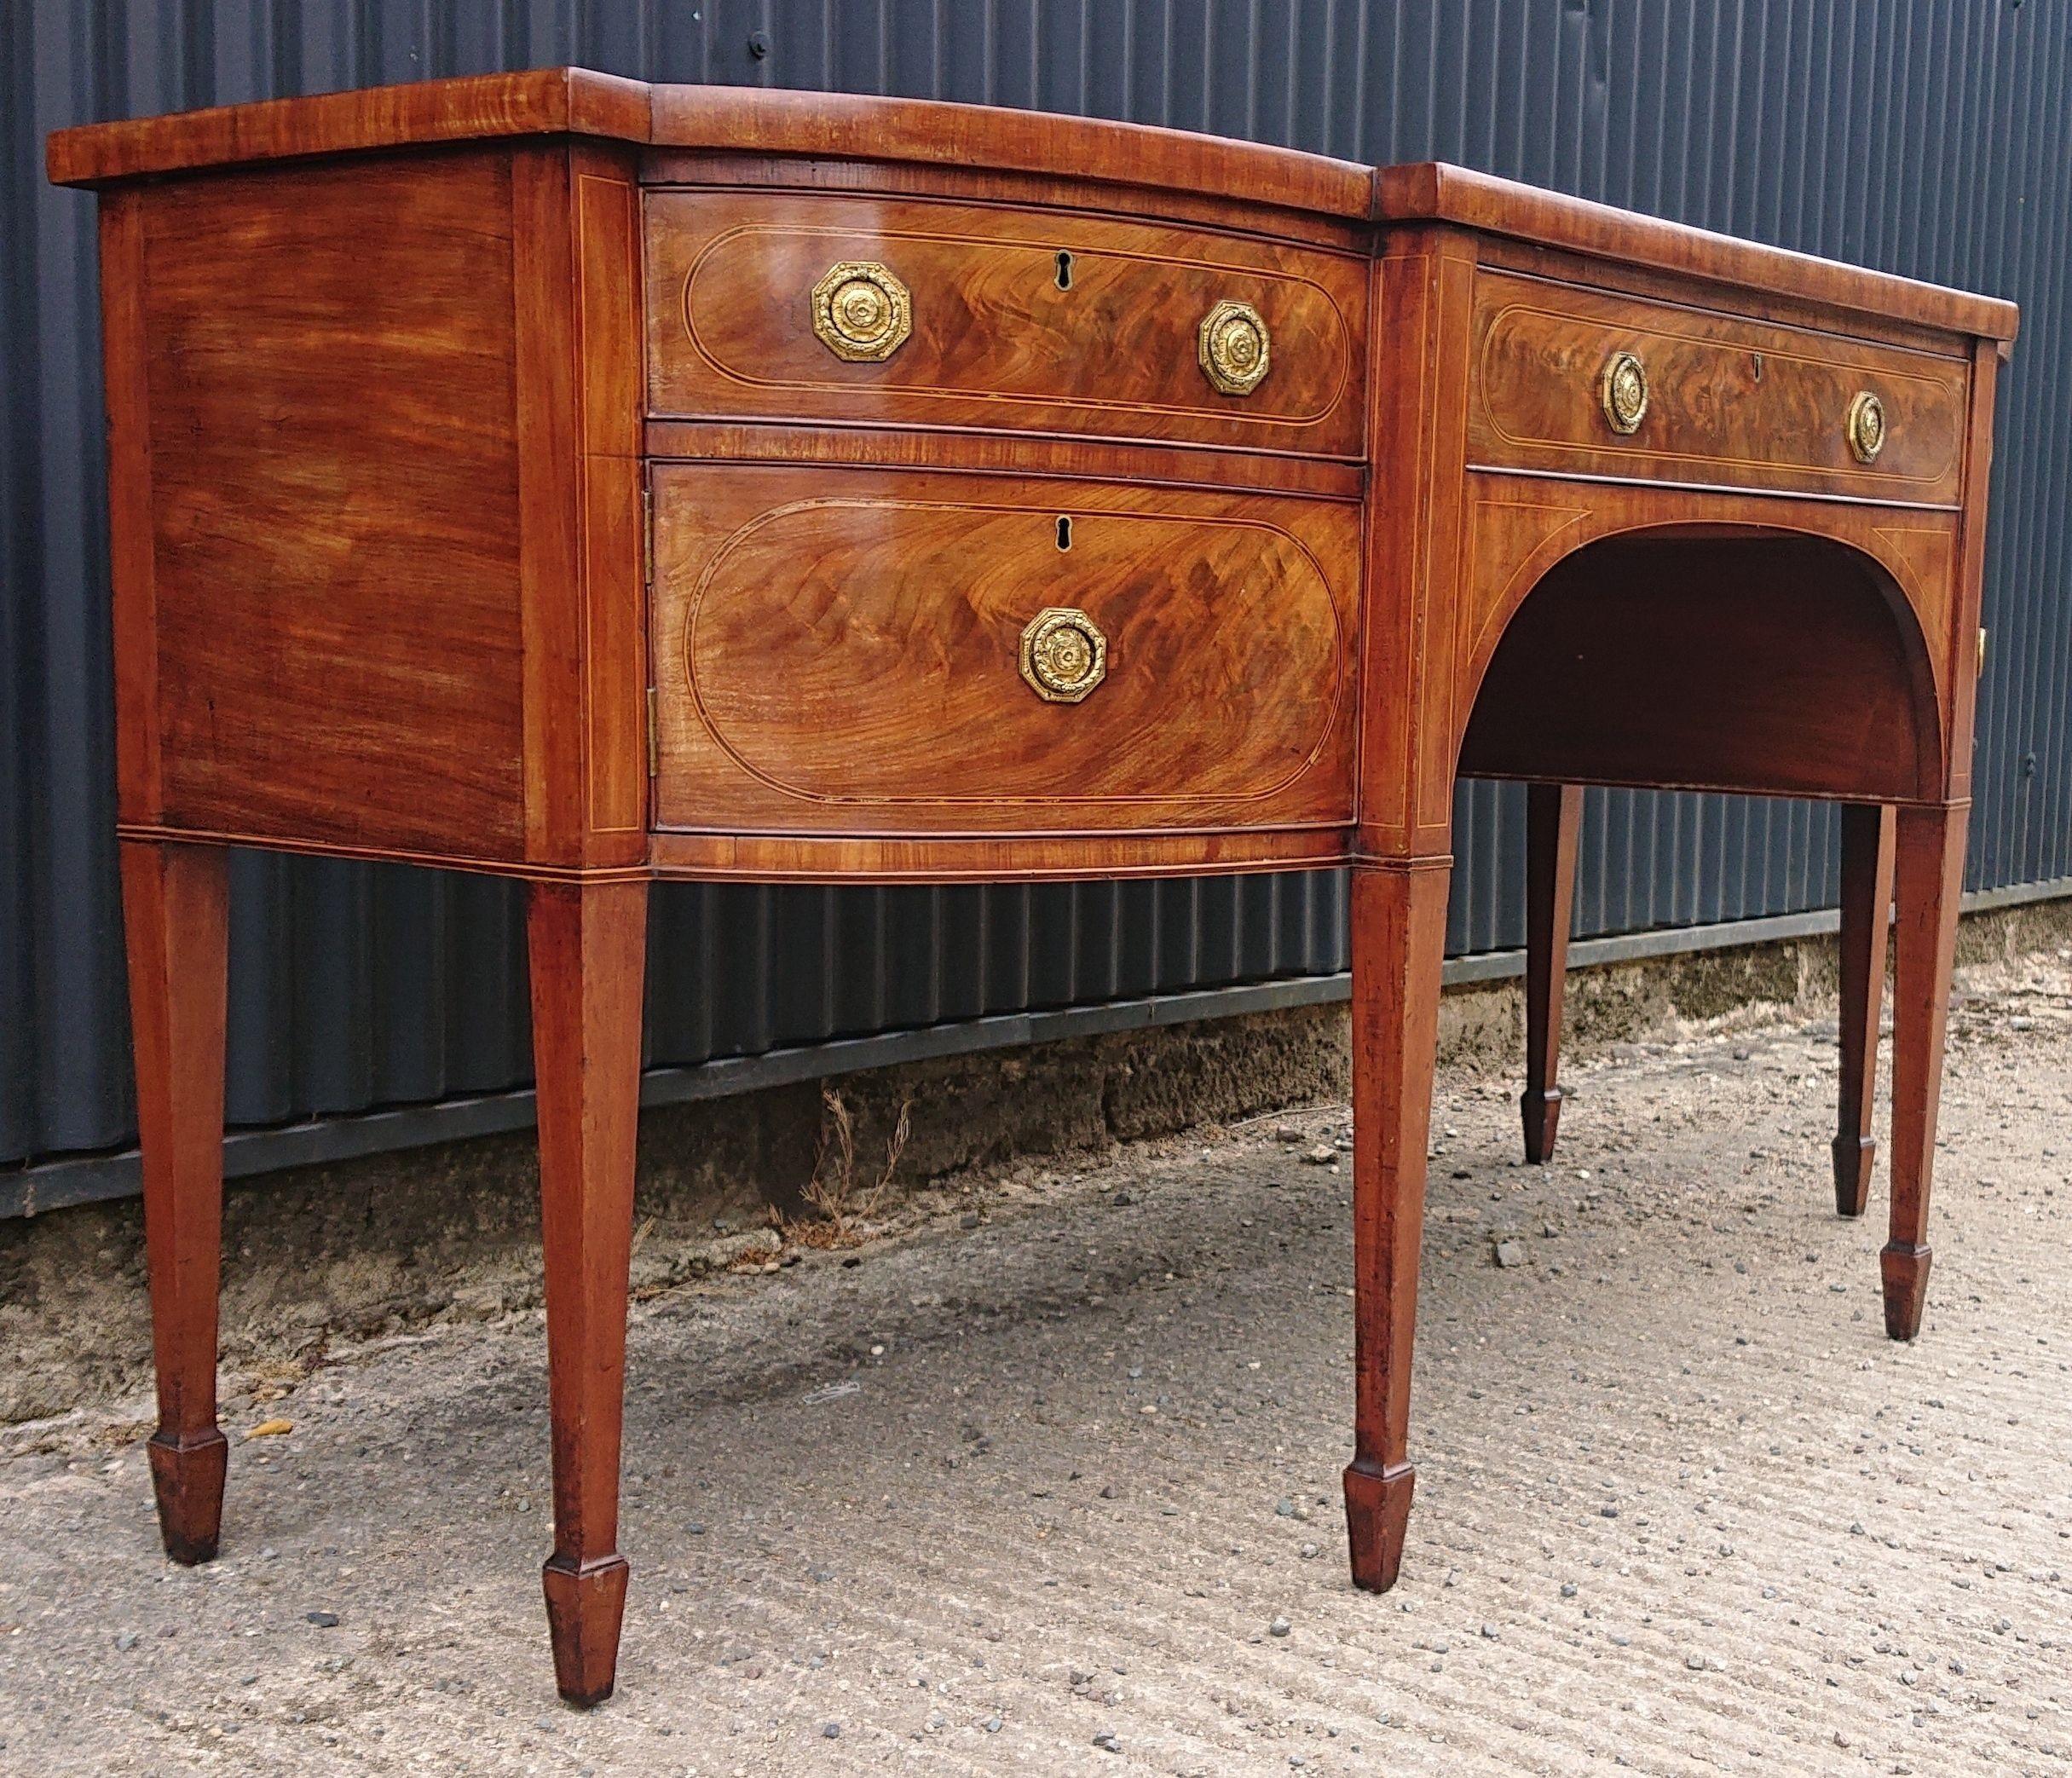 Early 19th Century Antique Sideboard George III Period Mahogany For Sale